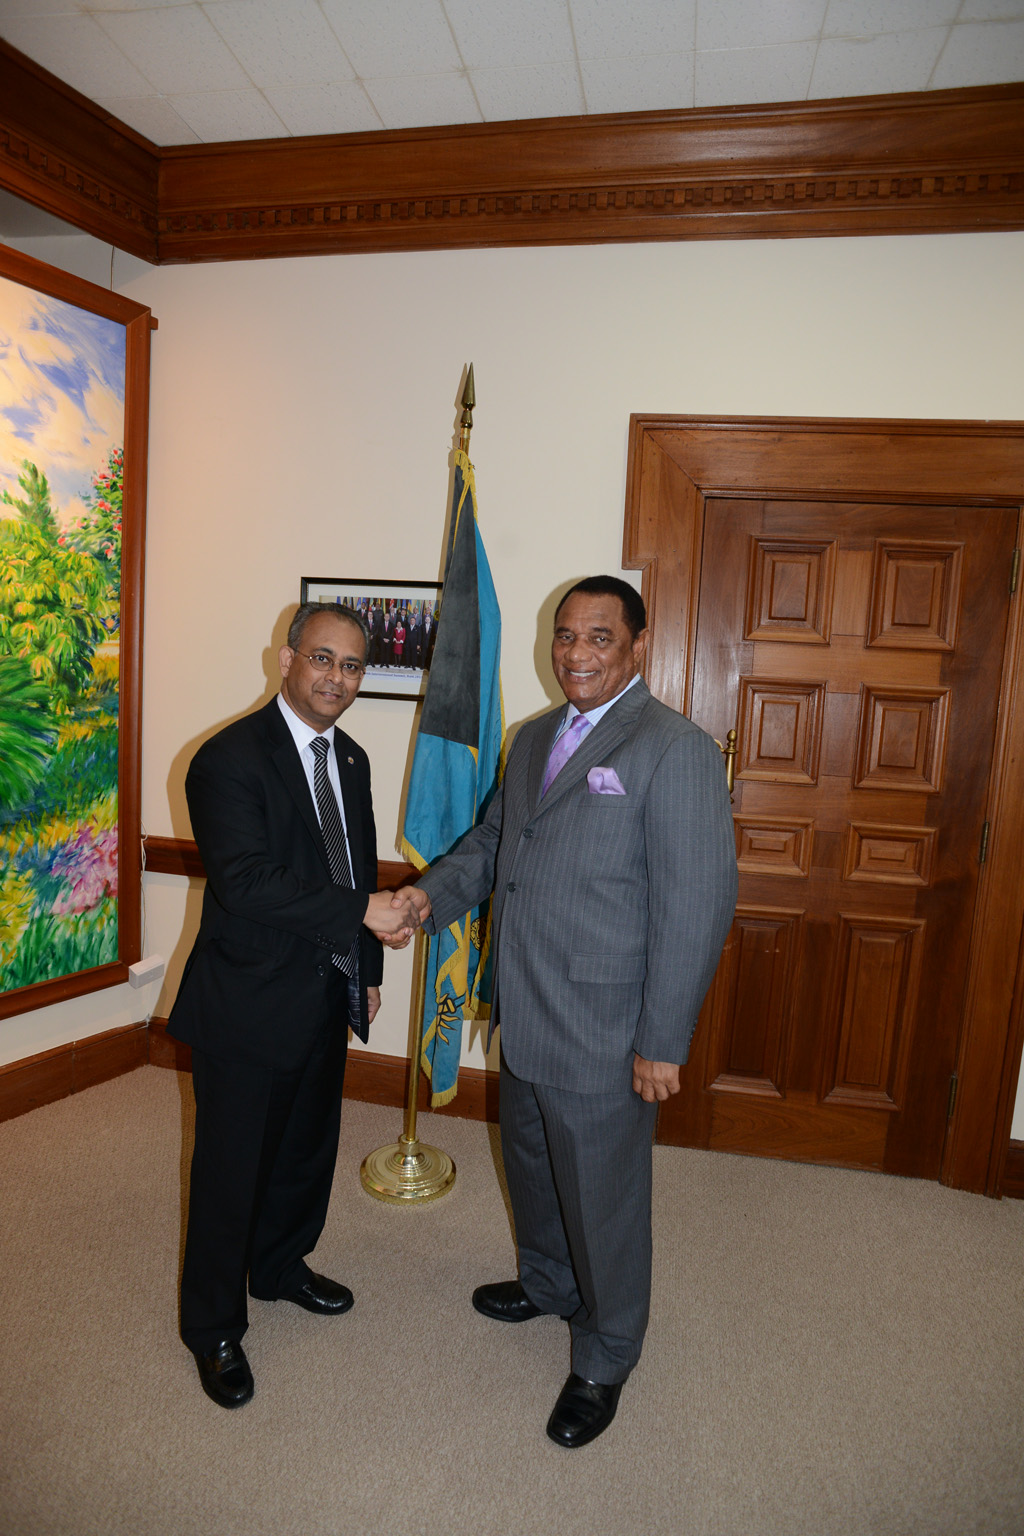 The Assistant Secretary General of the Organization of American States (OAS), Ambassador Albert Ramdin visits with the Prime Minister of The Bahamas, Rt. Hon. Perry G Christie-Nassau, Bahamas April 23rd, 2013(April 29, 2013)